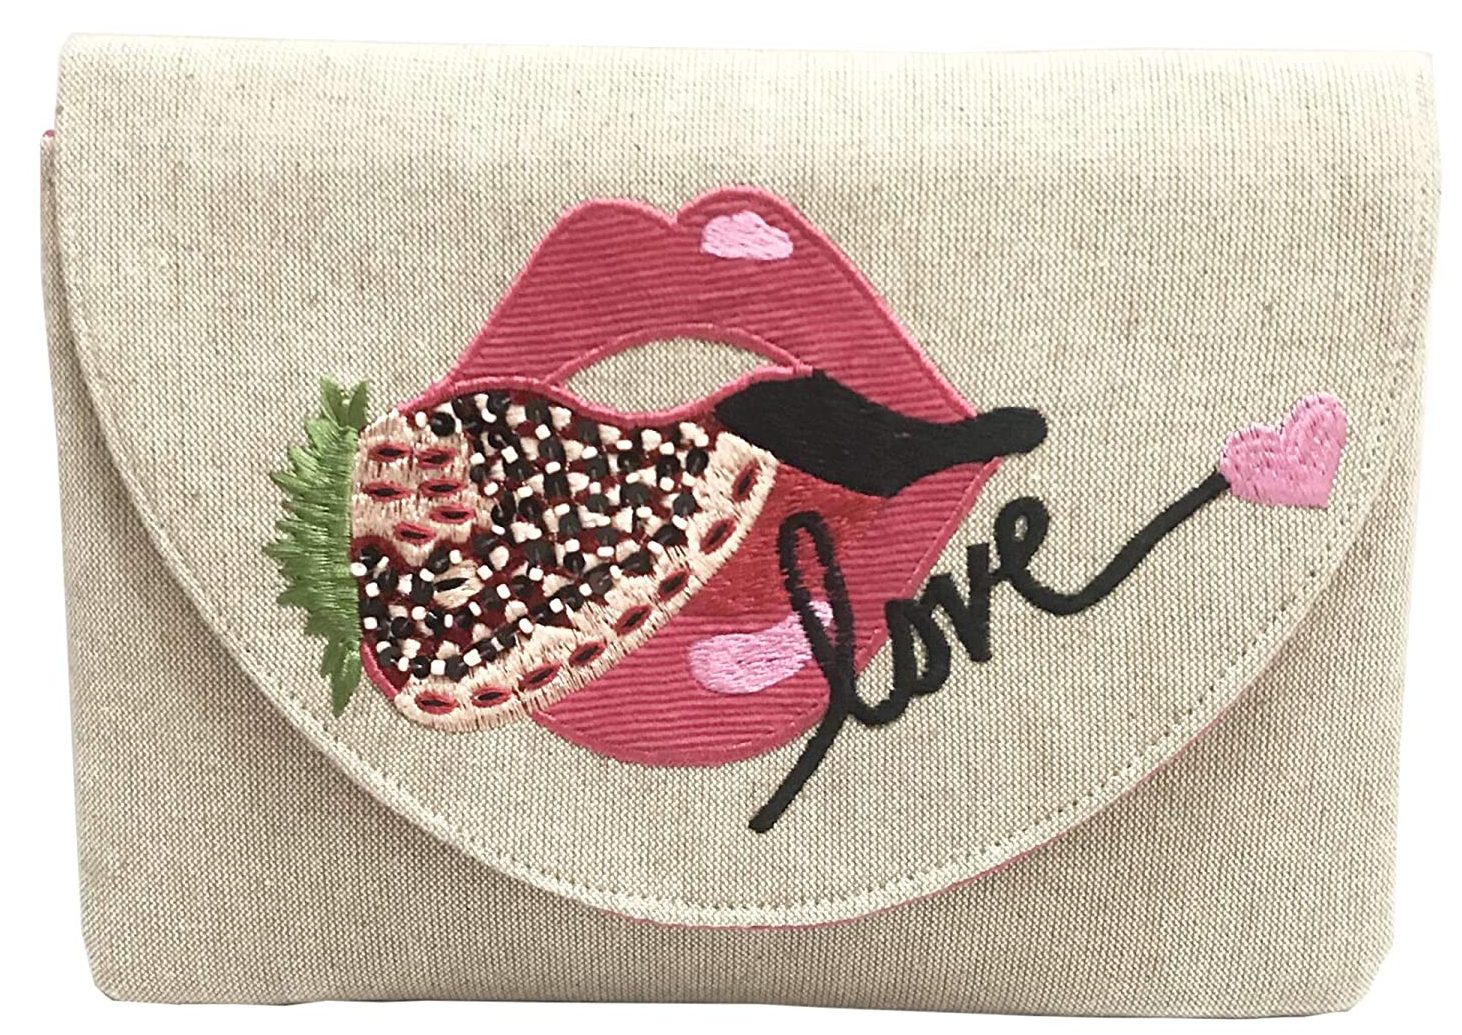 Women's Handcrafted Glossy Pink Lips Design Purse